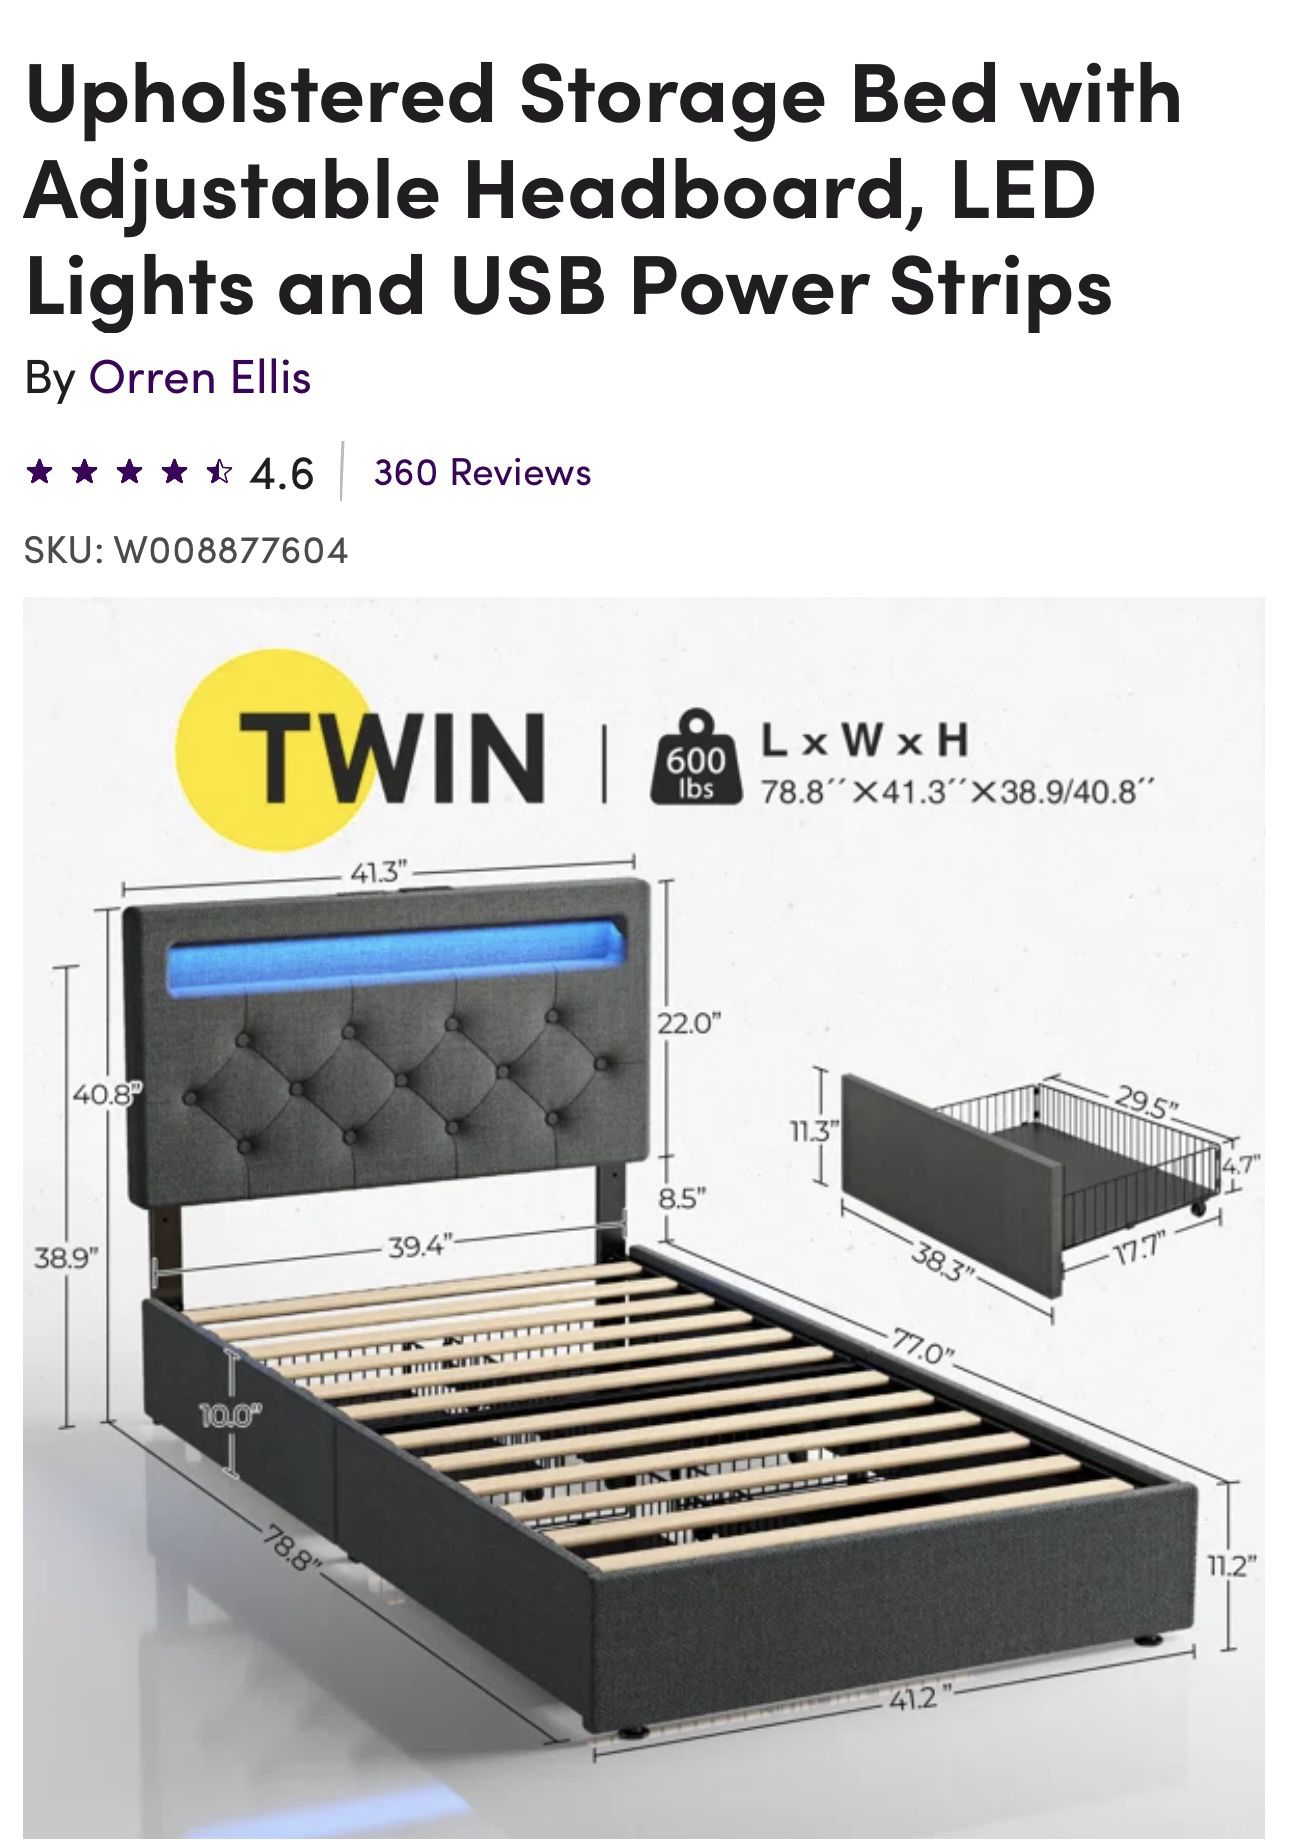 Brand New Unopened Twin Storage Beds with LED Lights and USB Charging Ports